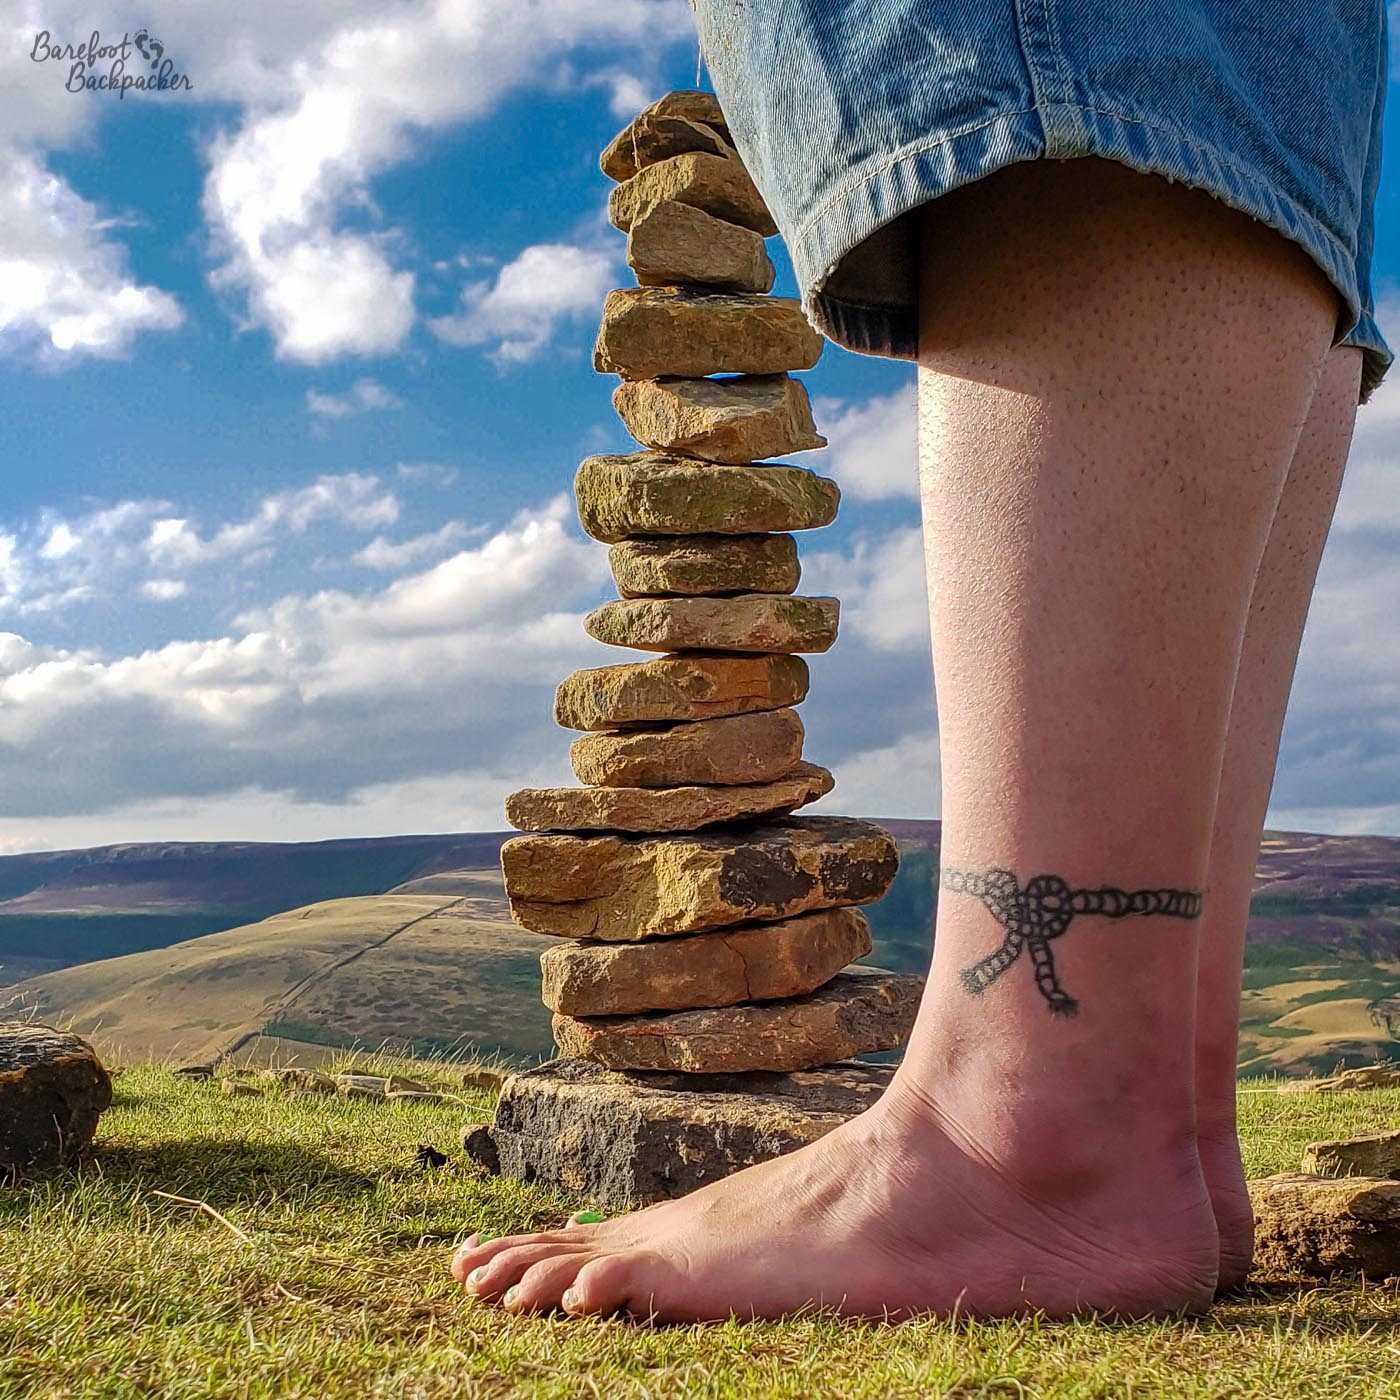 In the background are some rolling hills, and an open sky. The picture is dominated by a small cairn of stones piled up on the grass at the edge of a cliff, and next to and slightly in front, the lower legs and feet of someone are visible standing on the grass. Their denim trousers end just below the knee, and the rest of their legs, and feet, are bare. On the ankle that's visible is a rope motif tattoo.